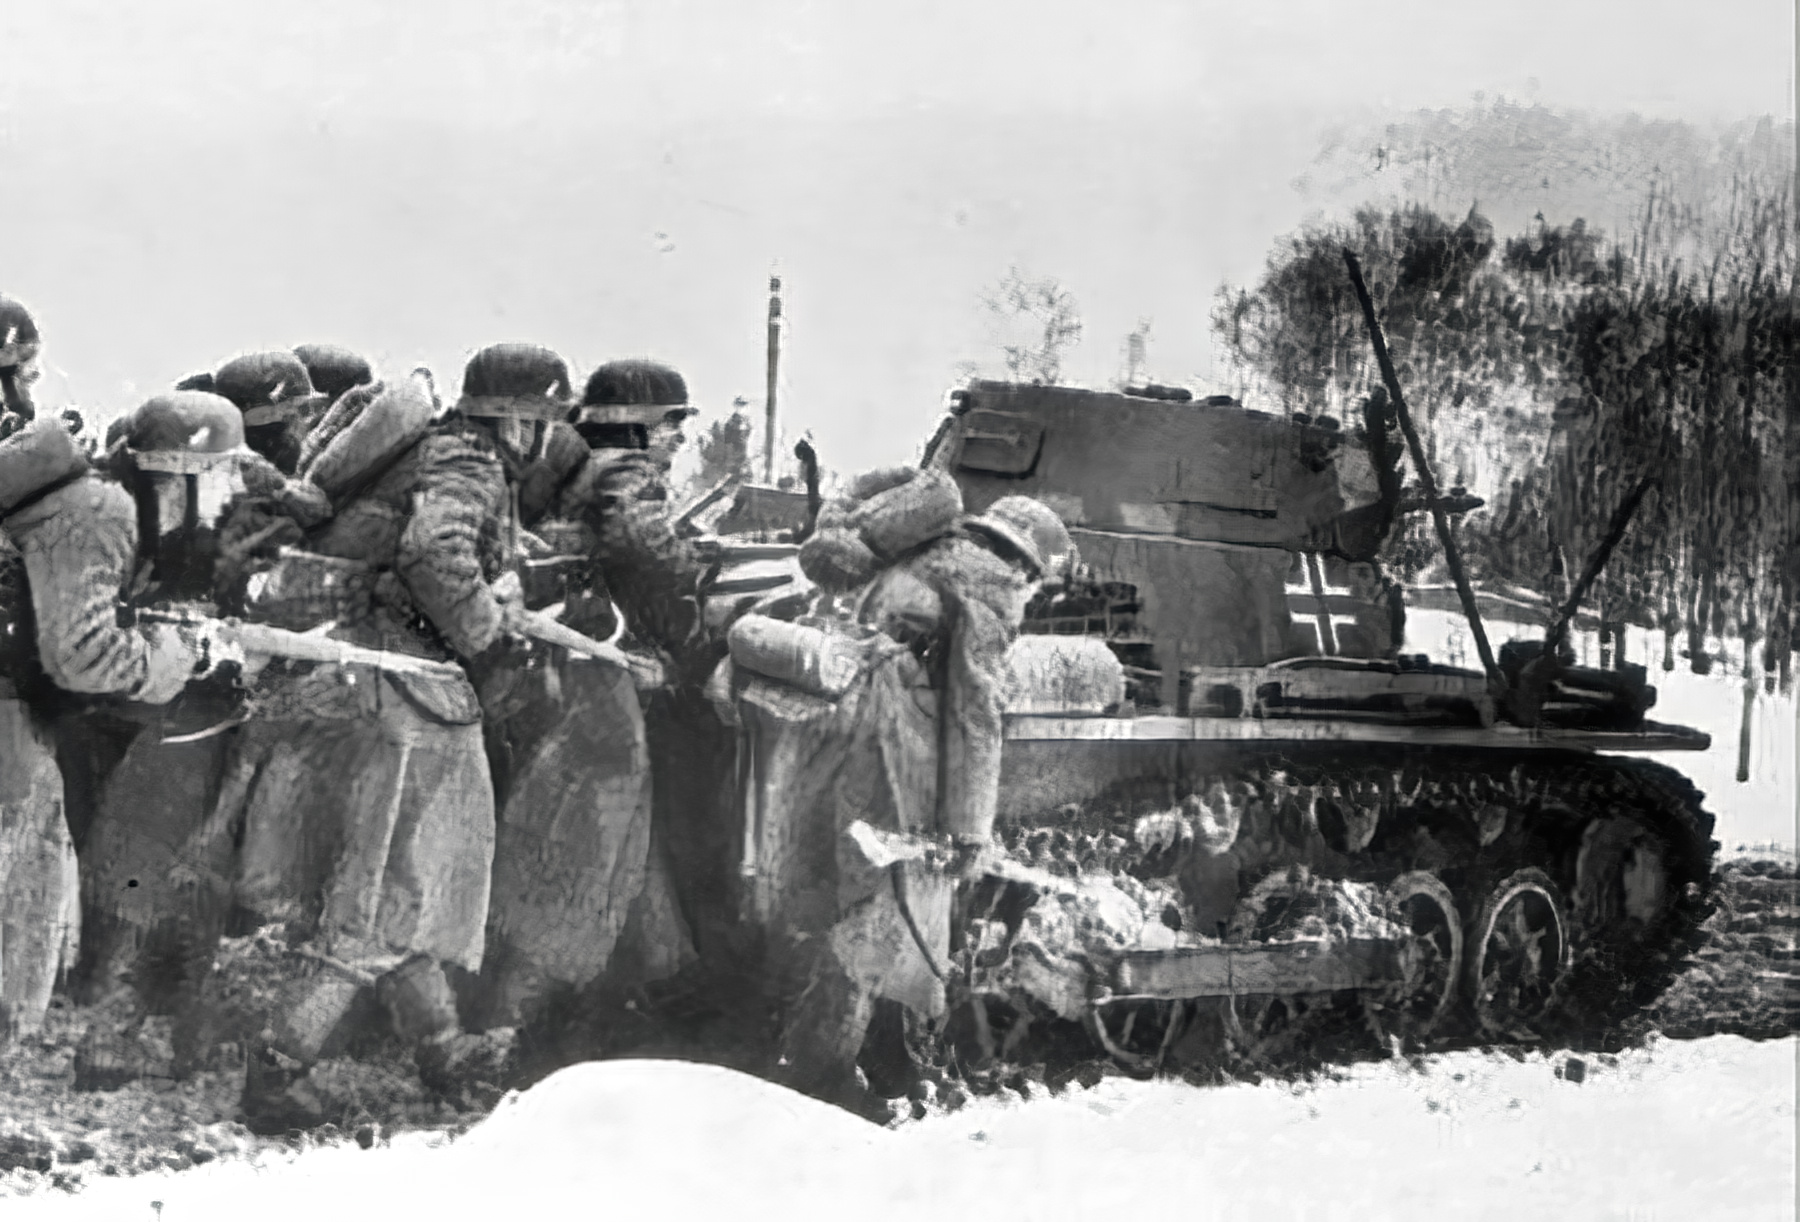 les chars allemands - Page 2 German-Infranty-along-with-a-Panzer-PzKpfw-I-light-tank-advancing-towards-the-front-lines-02